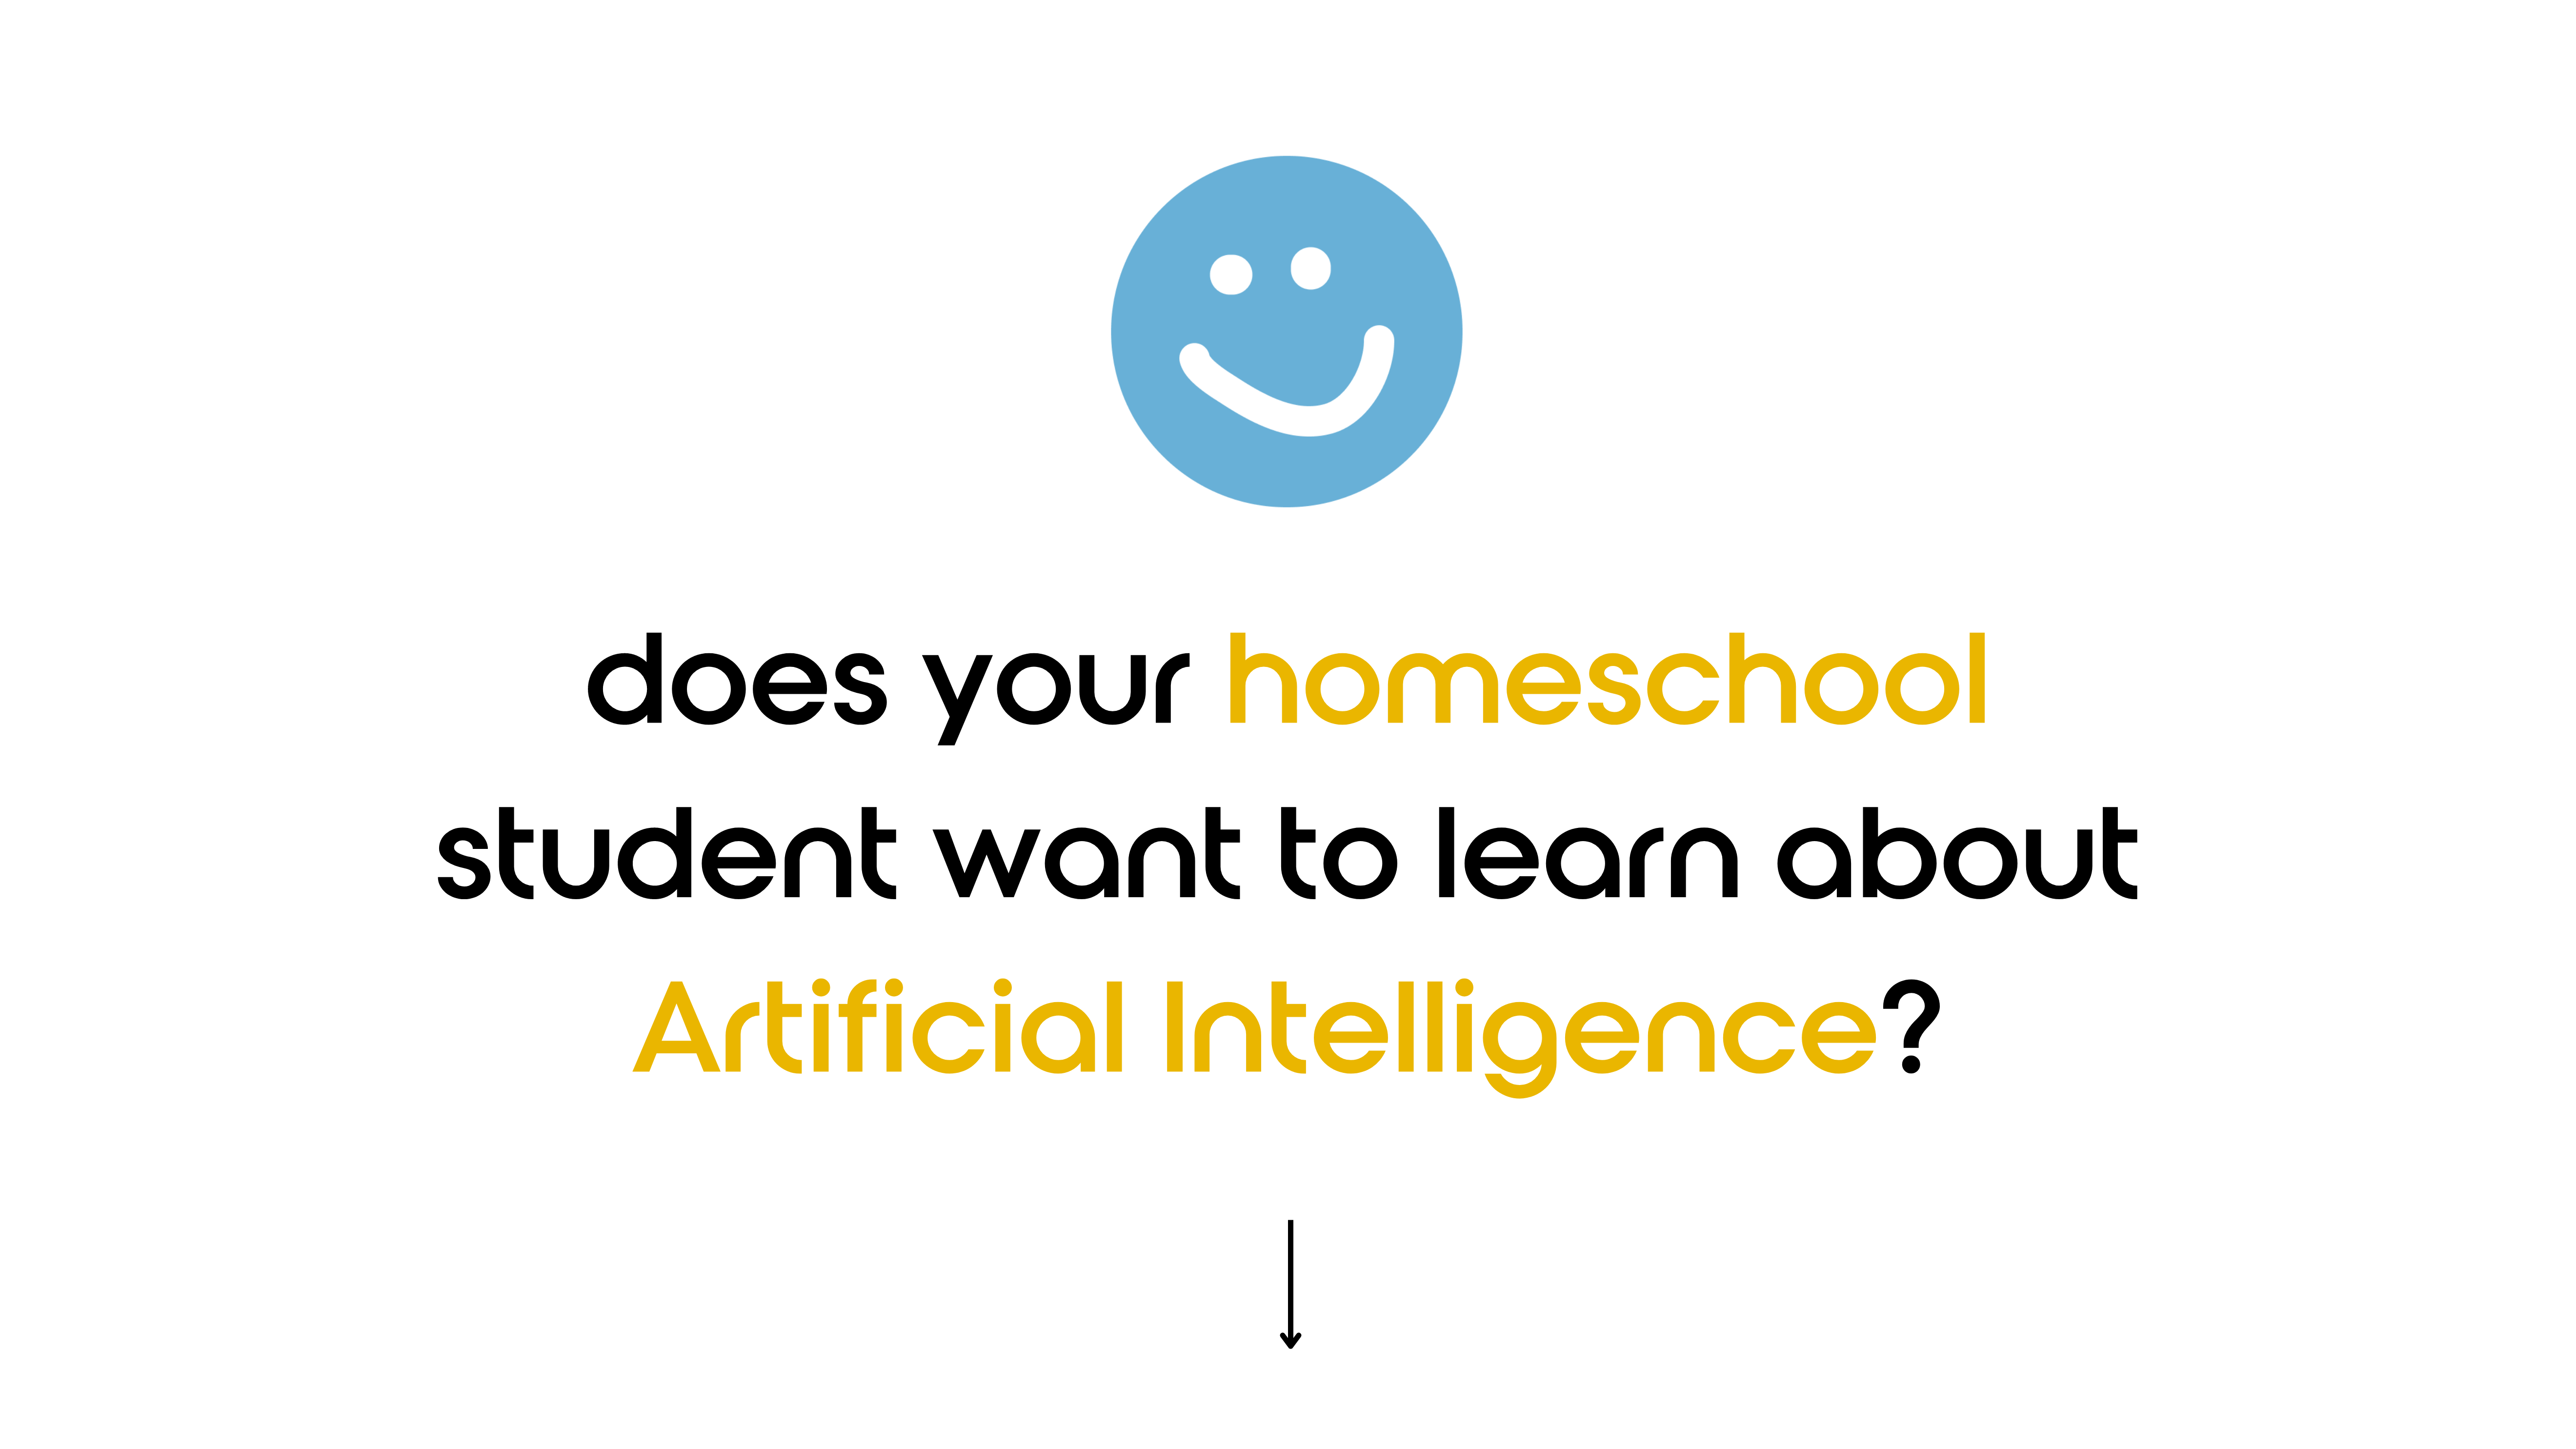 Does your homeschool student want to learn about artificial intelligence?